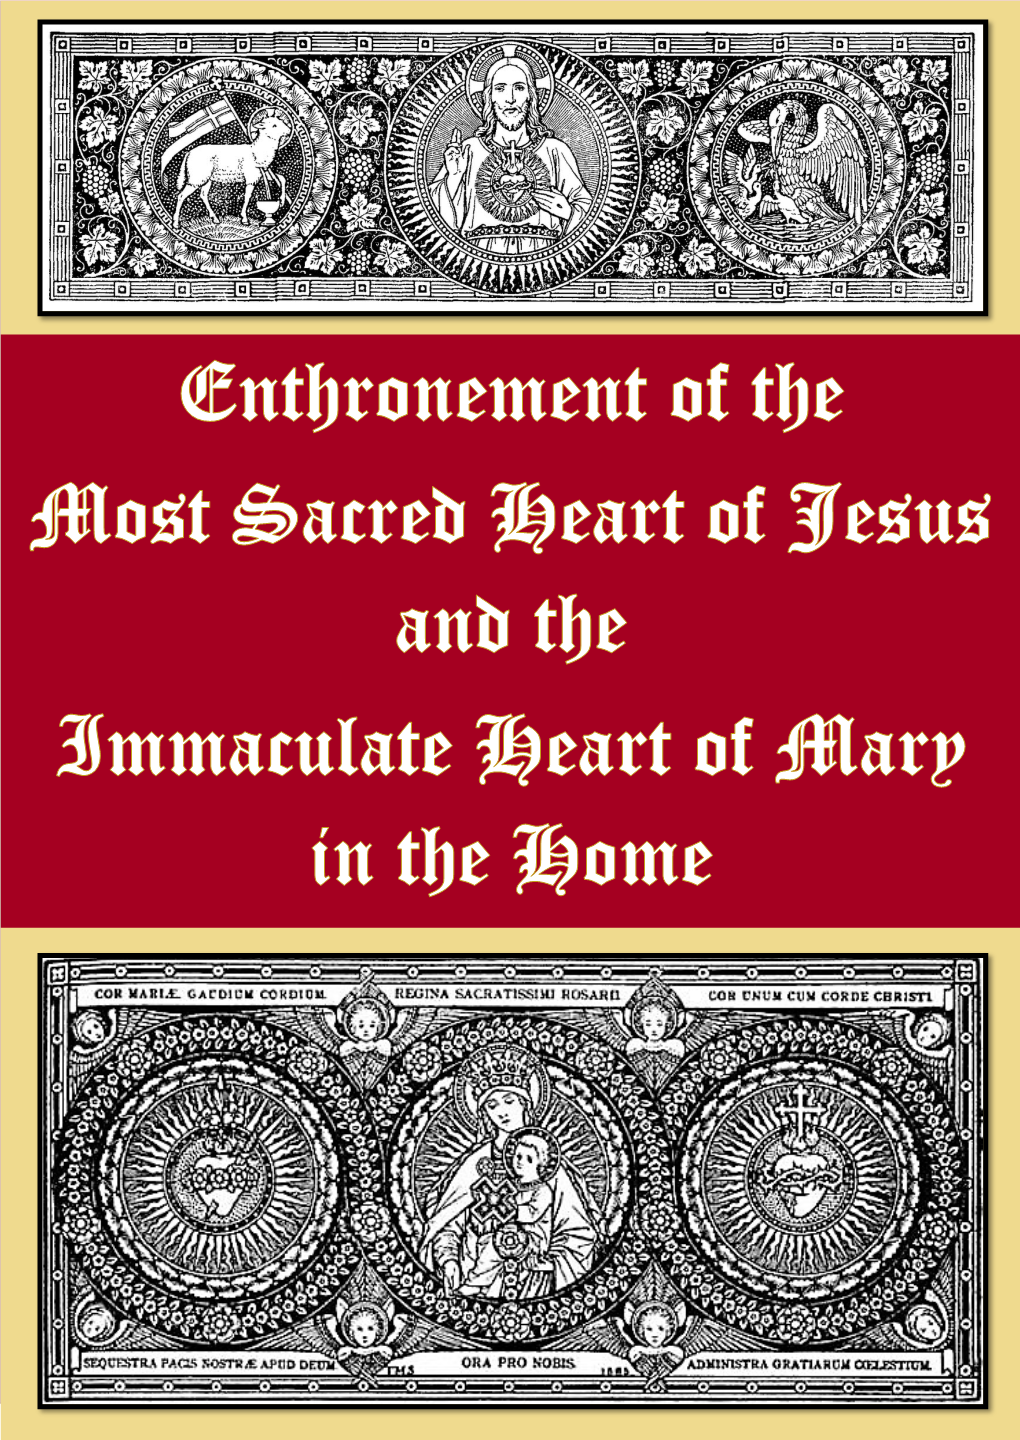 The Enthronement and Consecration the Enthronement Includes Necessarily Our Consecration to the Sacred Heart of Jesus